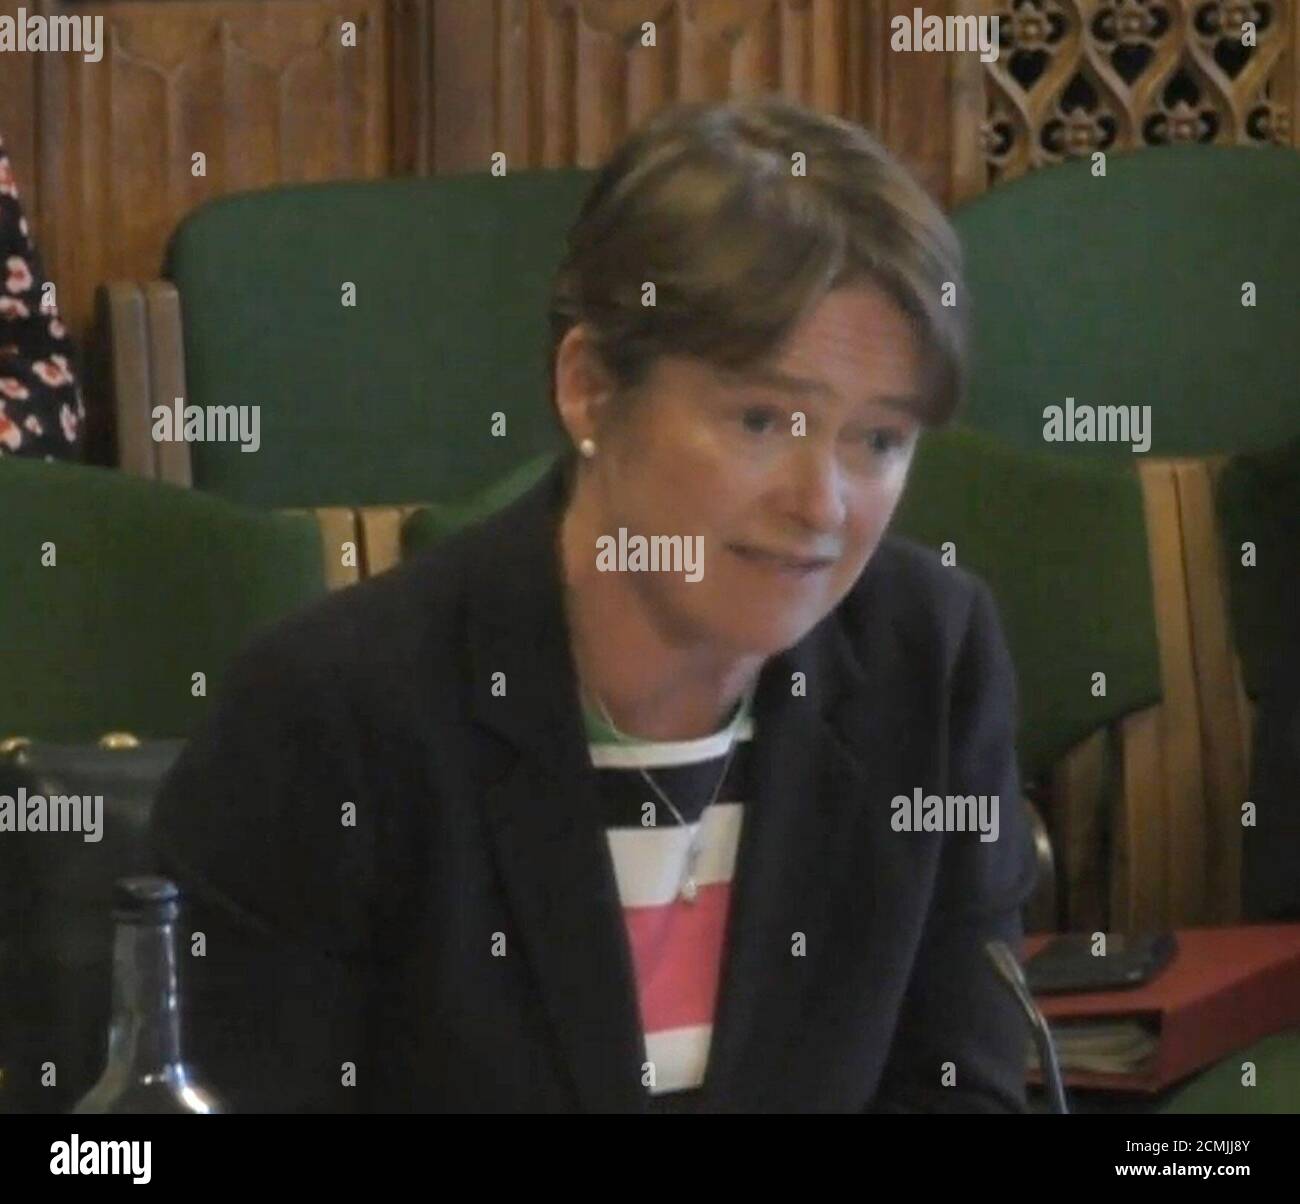 Screen grab of Baroness Dido Harding, Executive Chair of NHS Test and Trace Science giving evidence to the Commons Science and Technology Committee ,in the House of Commons, London, on UK testing capacity after Prime Minister Boris Johnson admitted there is not enough capacity in the testing system after demand 'massively accelerated' in recent weeks. Stock Photo